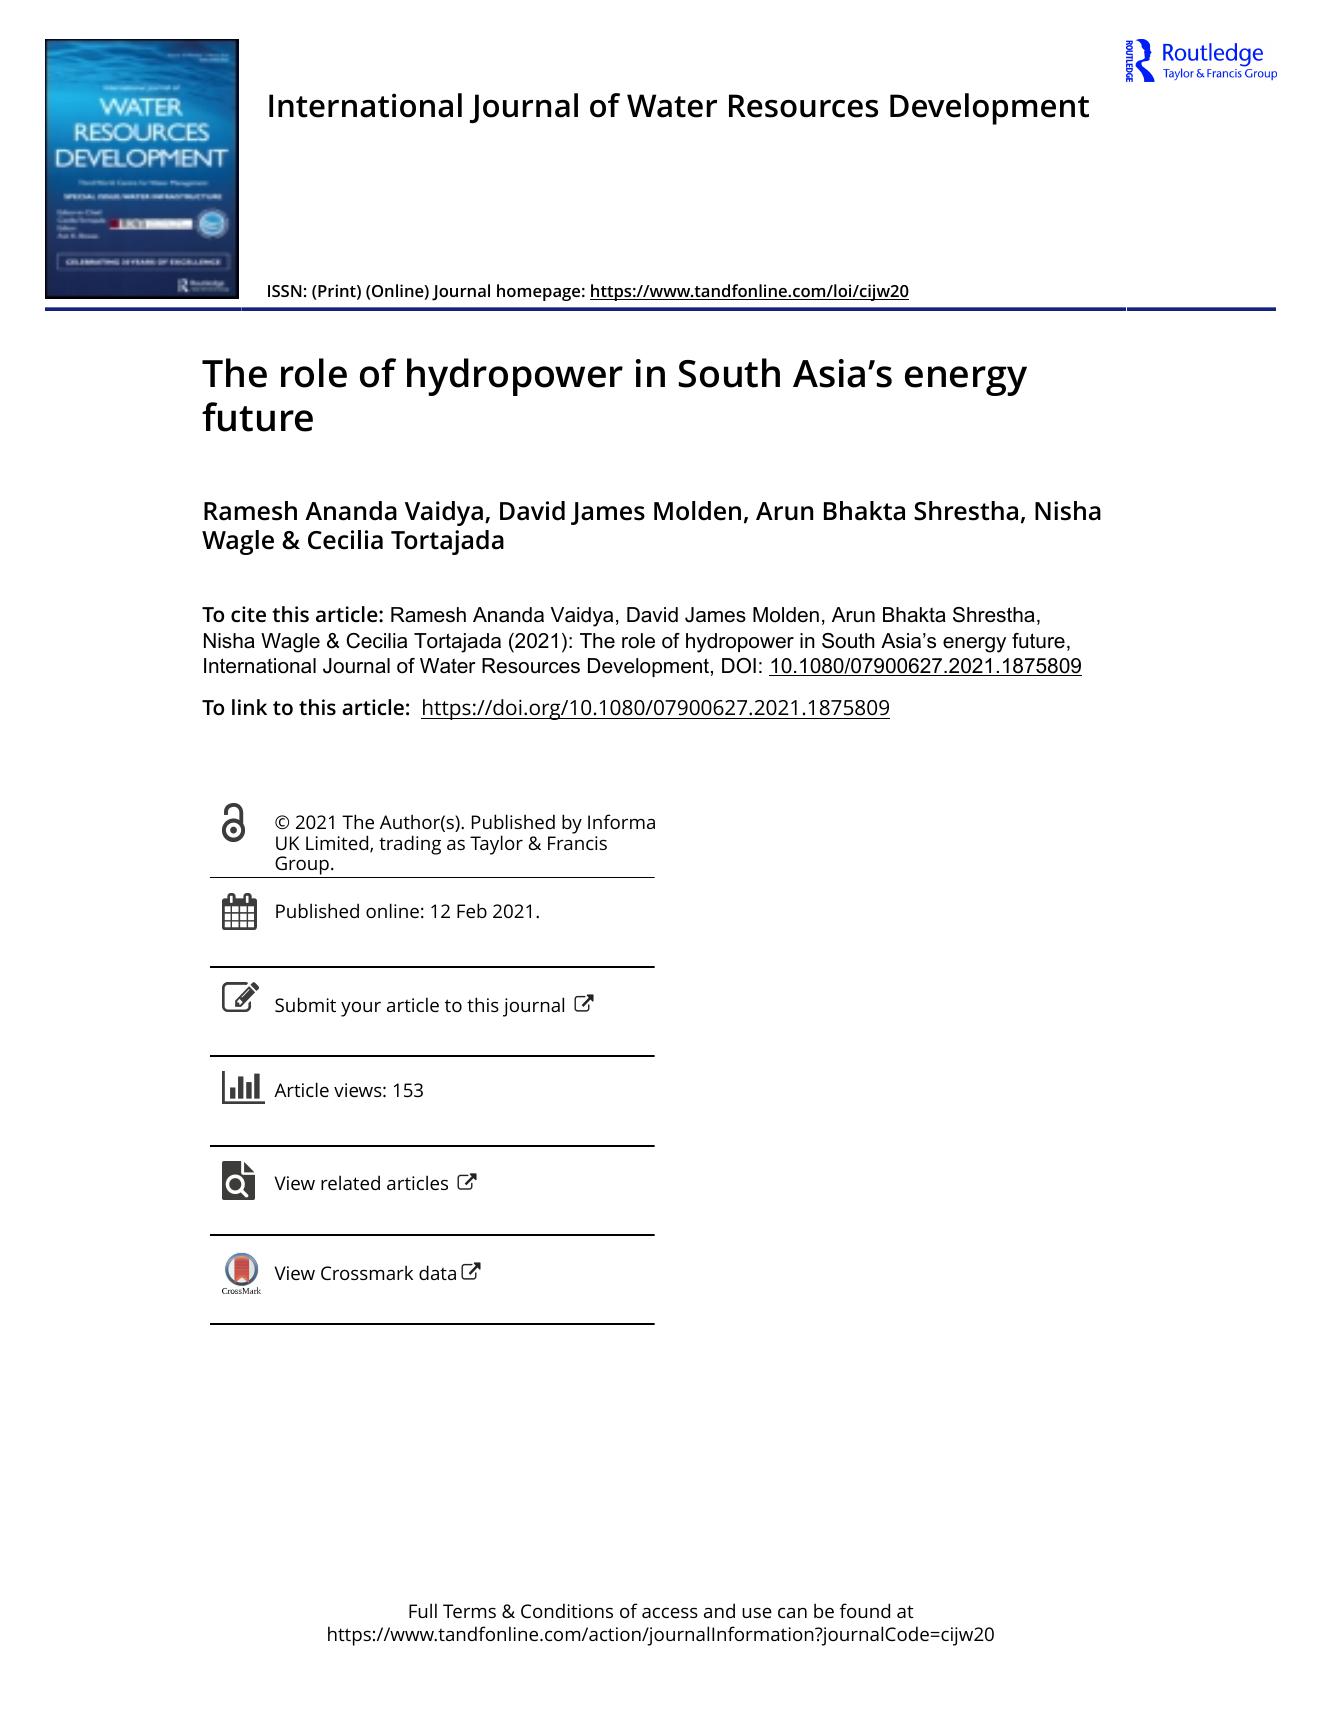 The role of hydropower in South Asia’s energy future